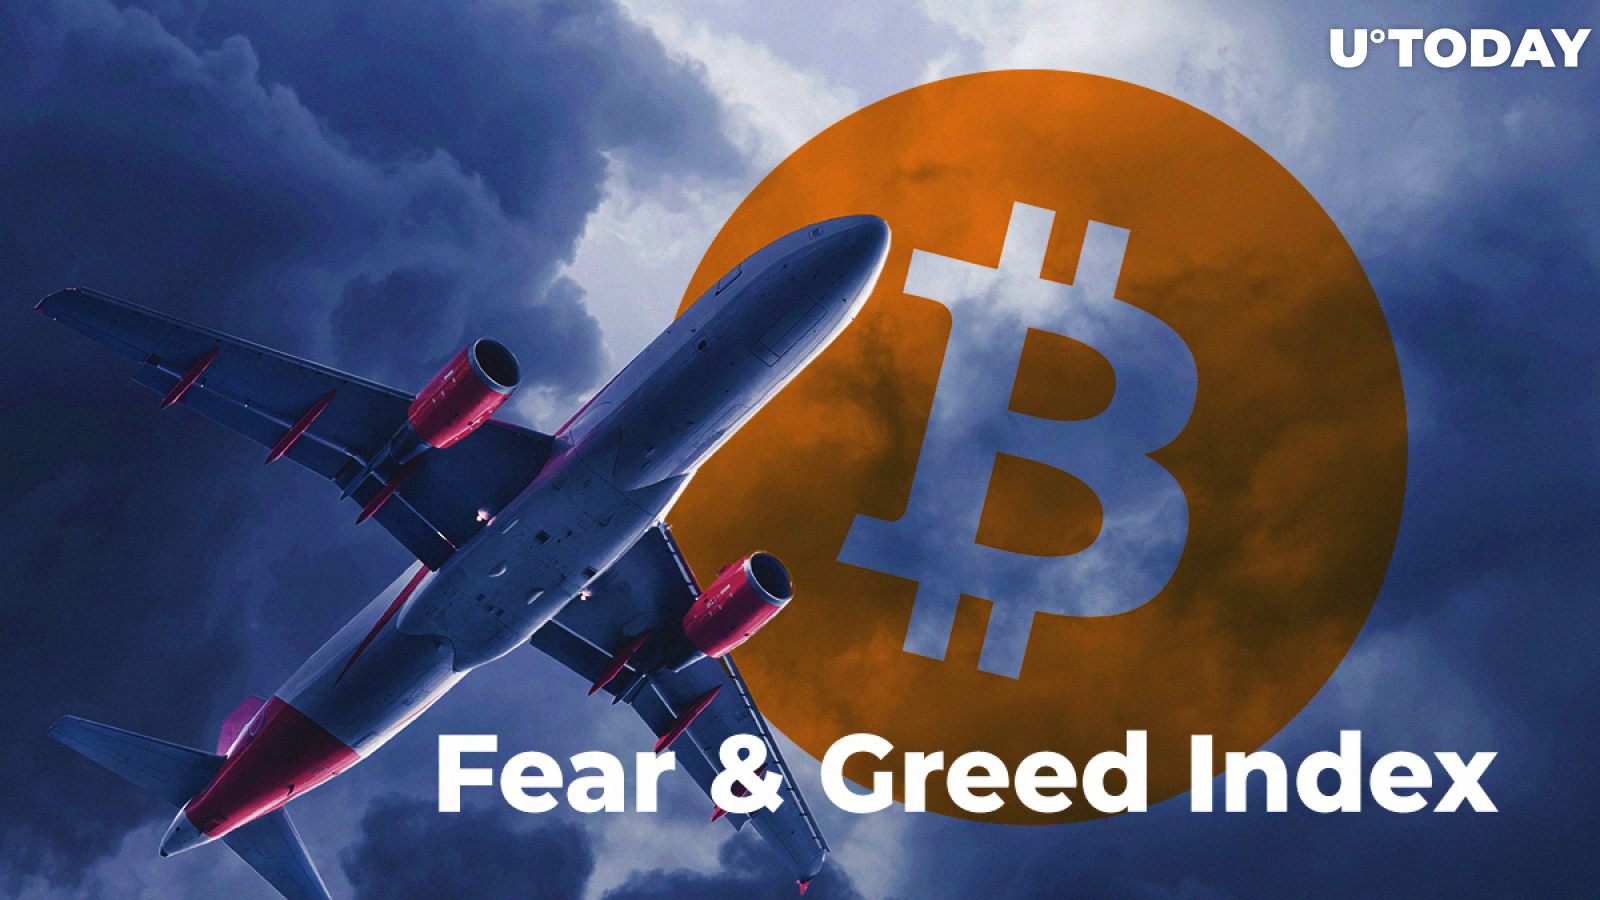 Bitcoin (BTC) Index Shows Reasonable Fear – Expect Turbulence Up and Down